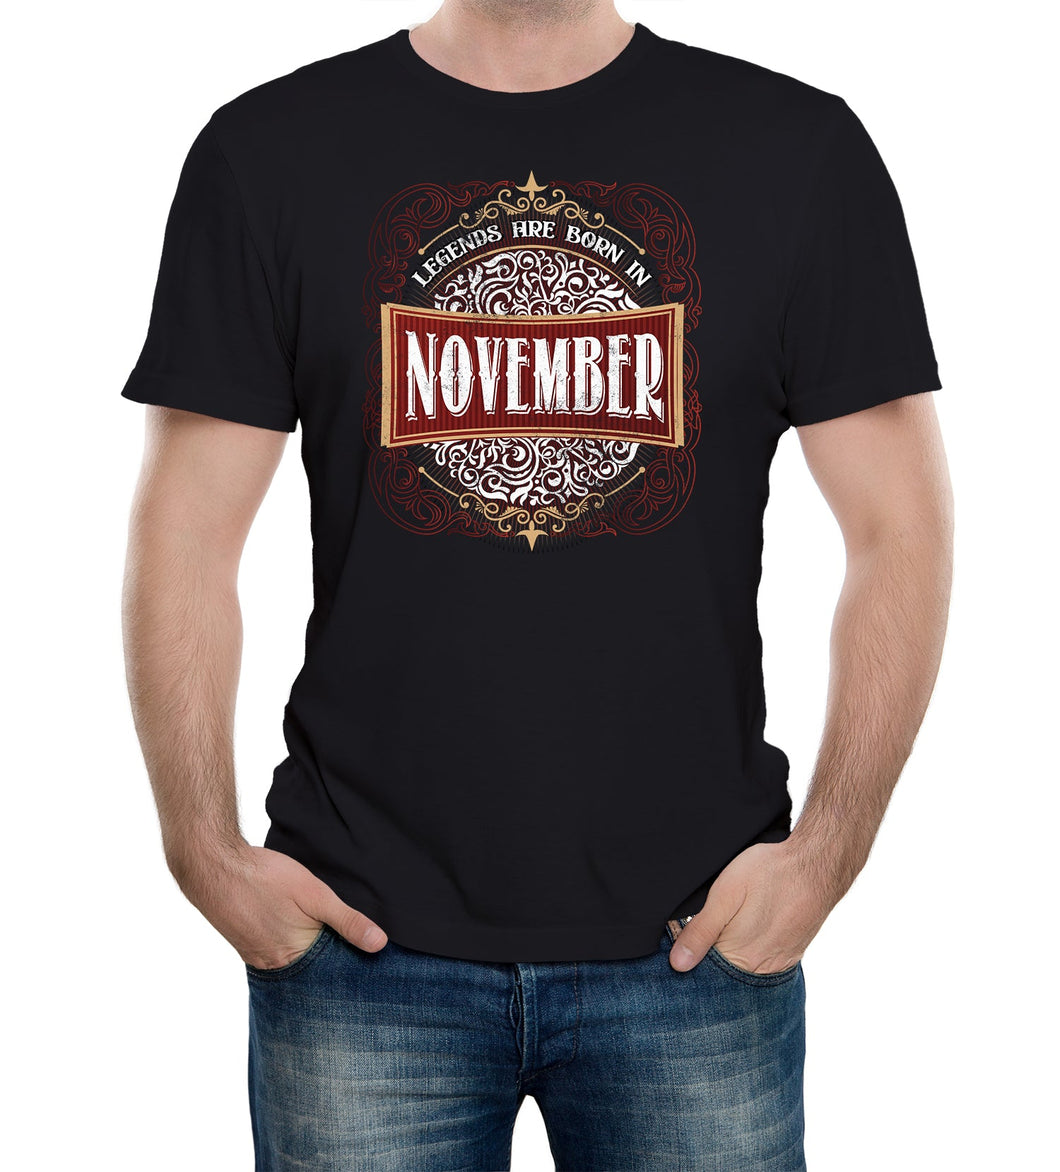 Reality Glitch Only Legends Are Born in November Birthday Mens T-Shirt